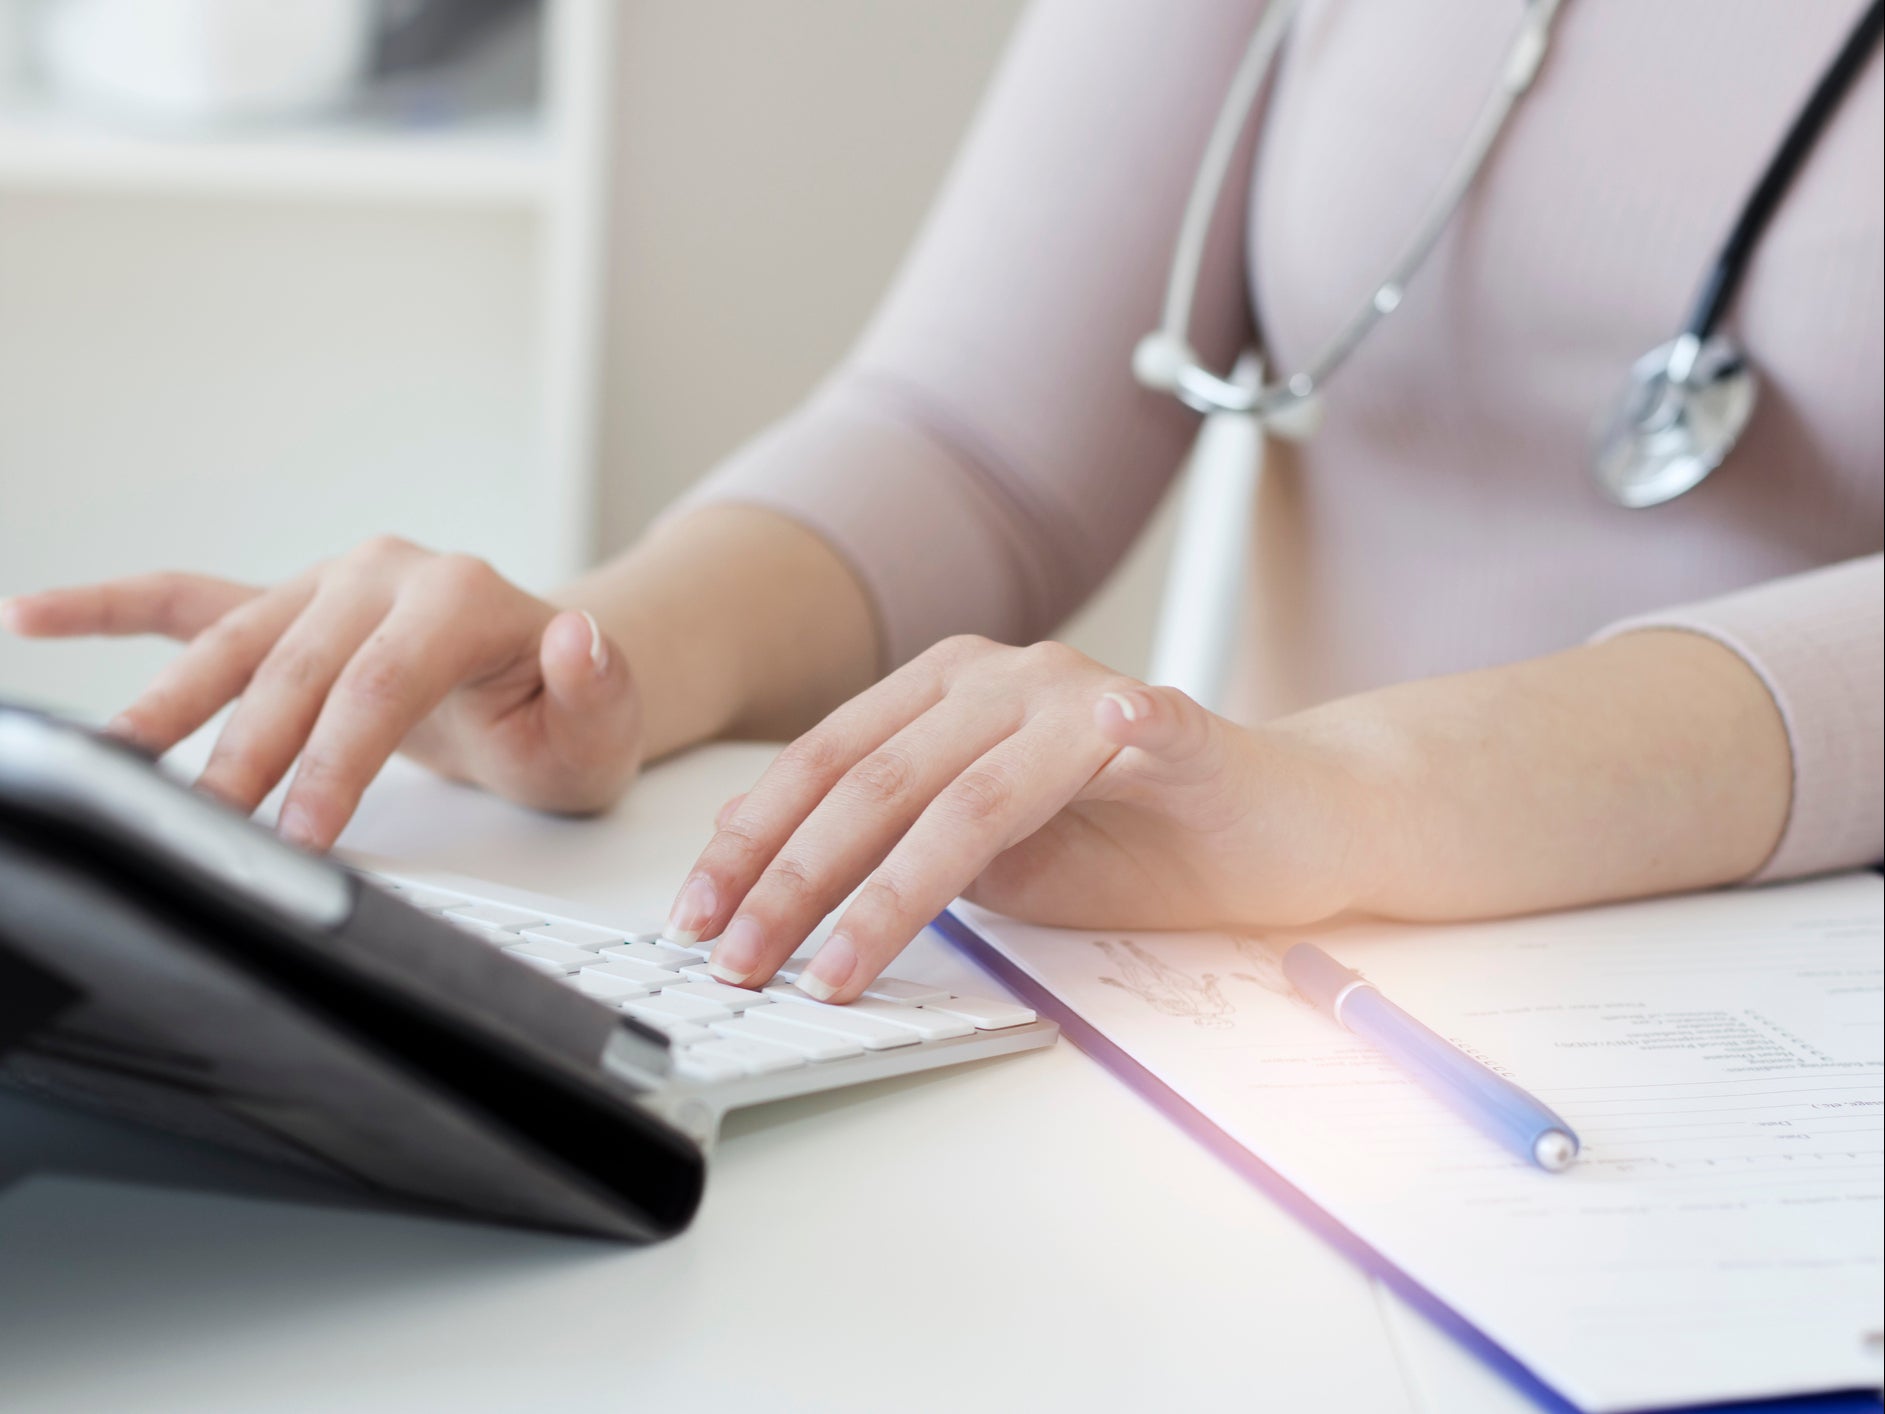 A GP fit note is issued after the first seven days of sickness absence if a doctor agrees the patient is too ill to work